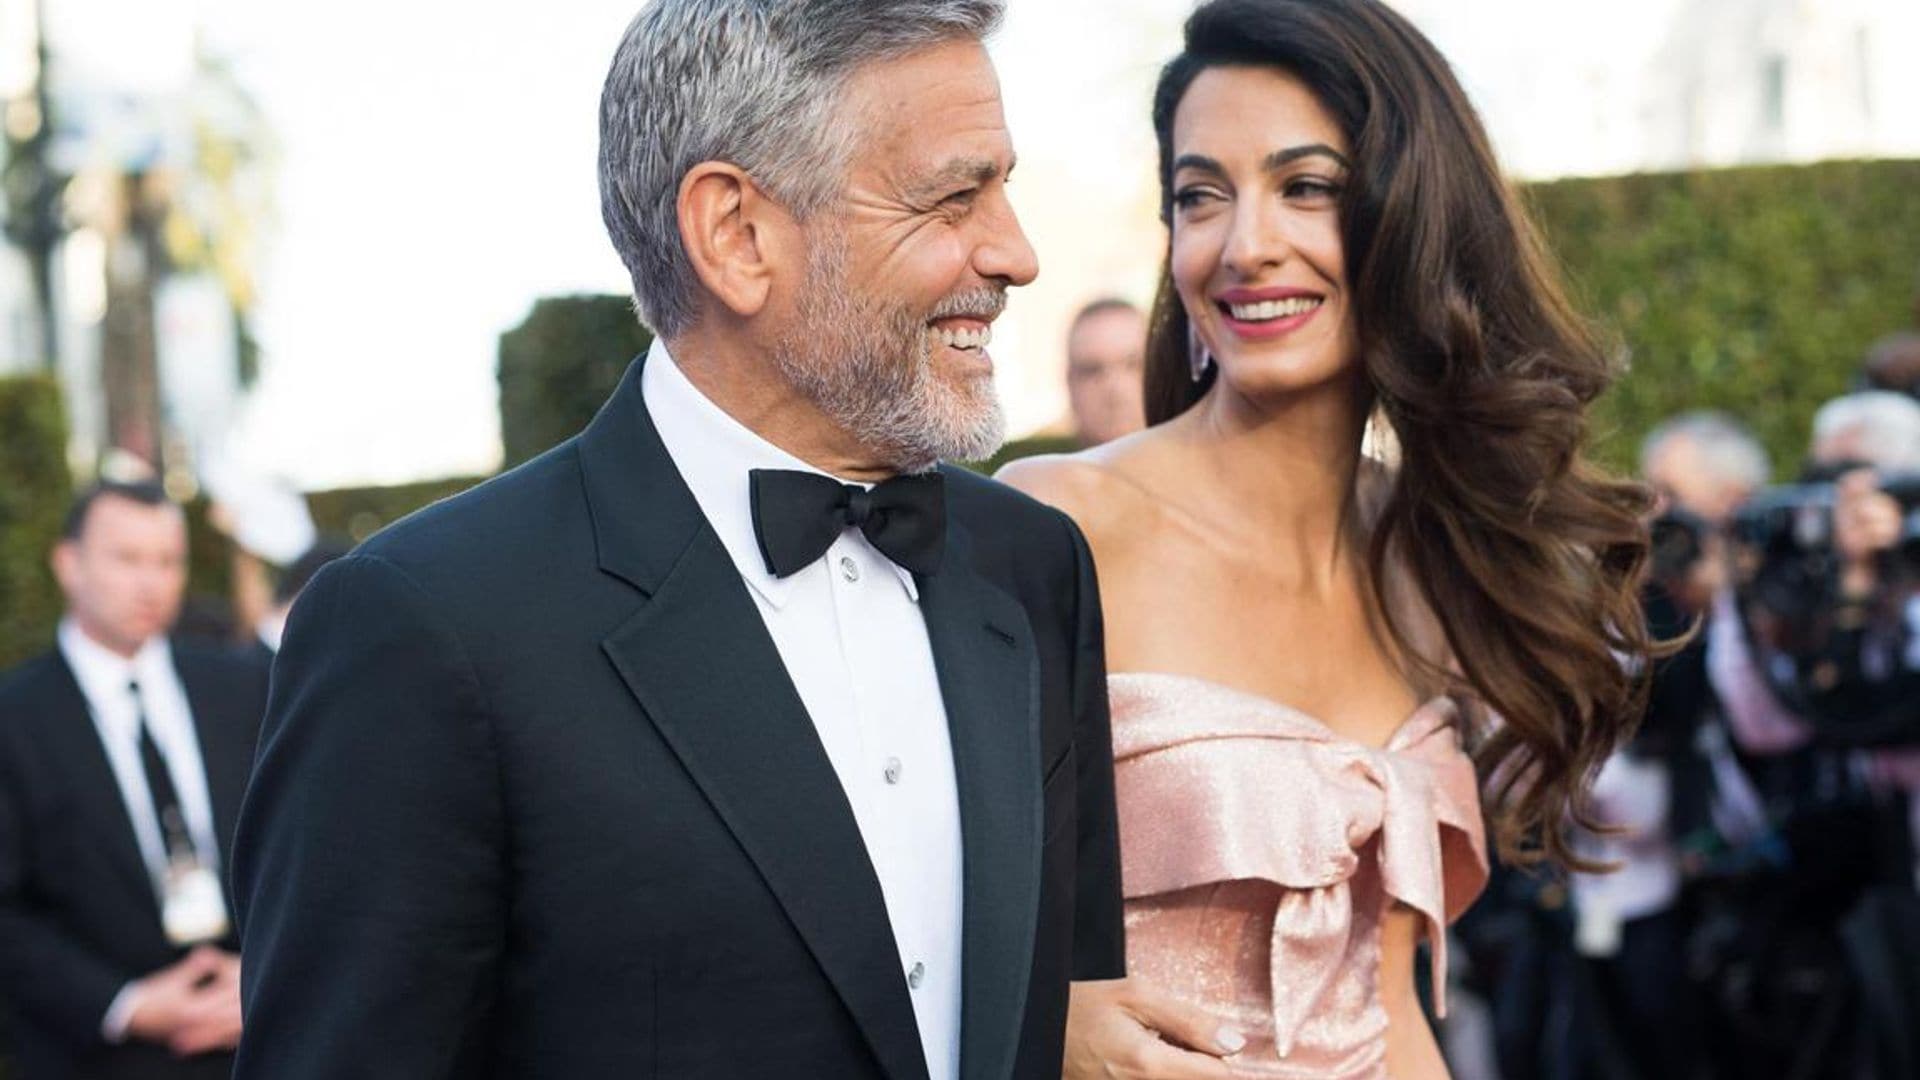 George Clooney ‘didn't know how un-full’ his life was until he met wife Amal Clooney